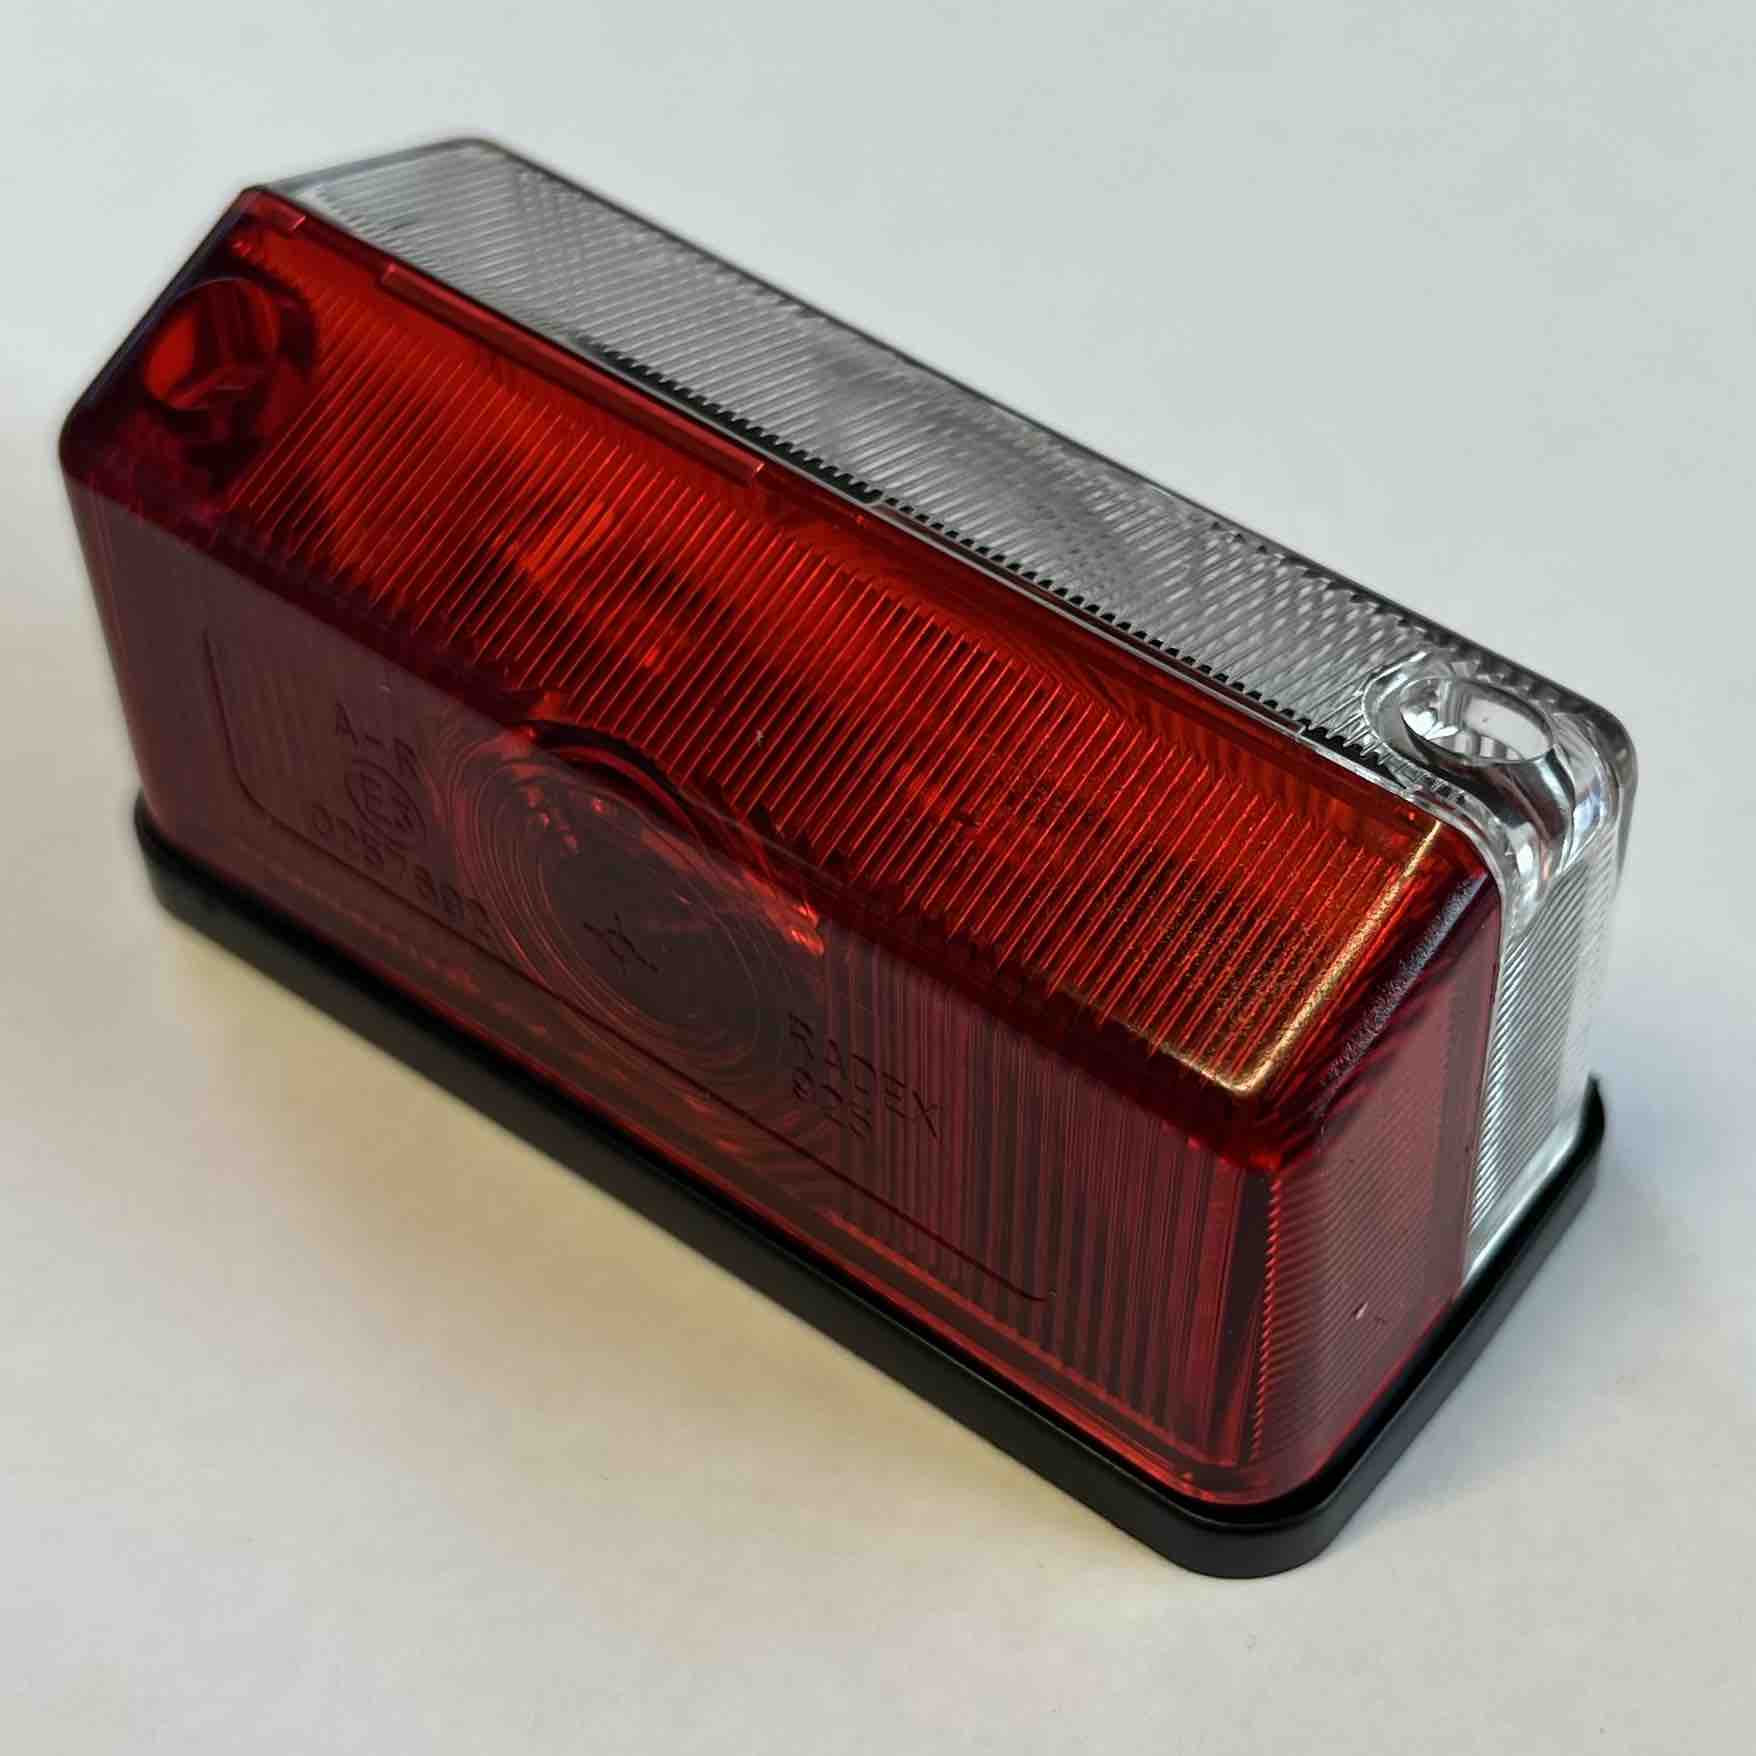 Rear mounted Radex marker light -red/white